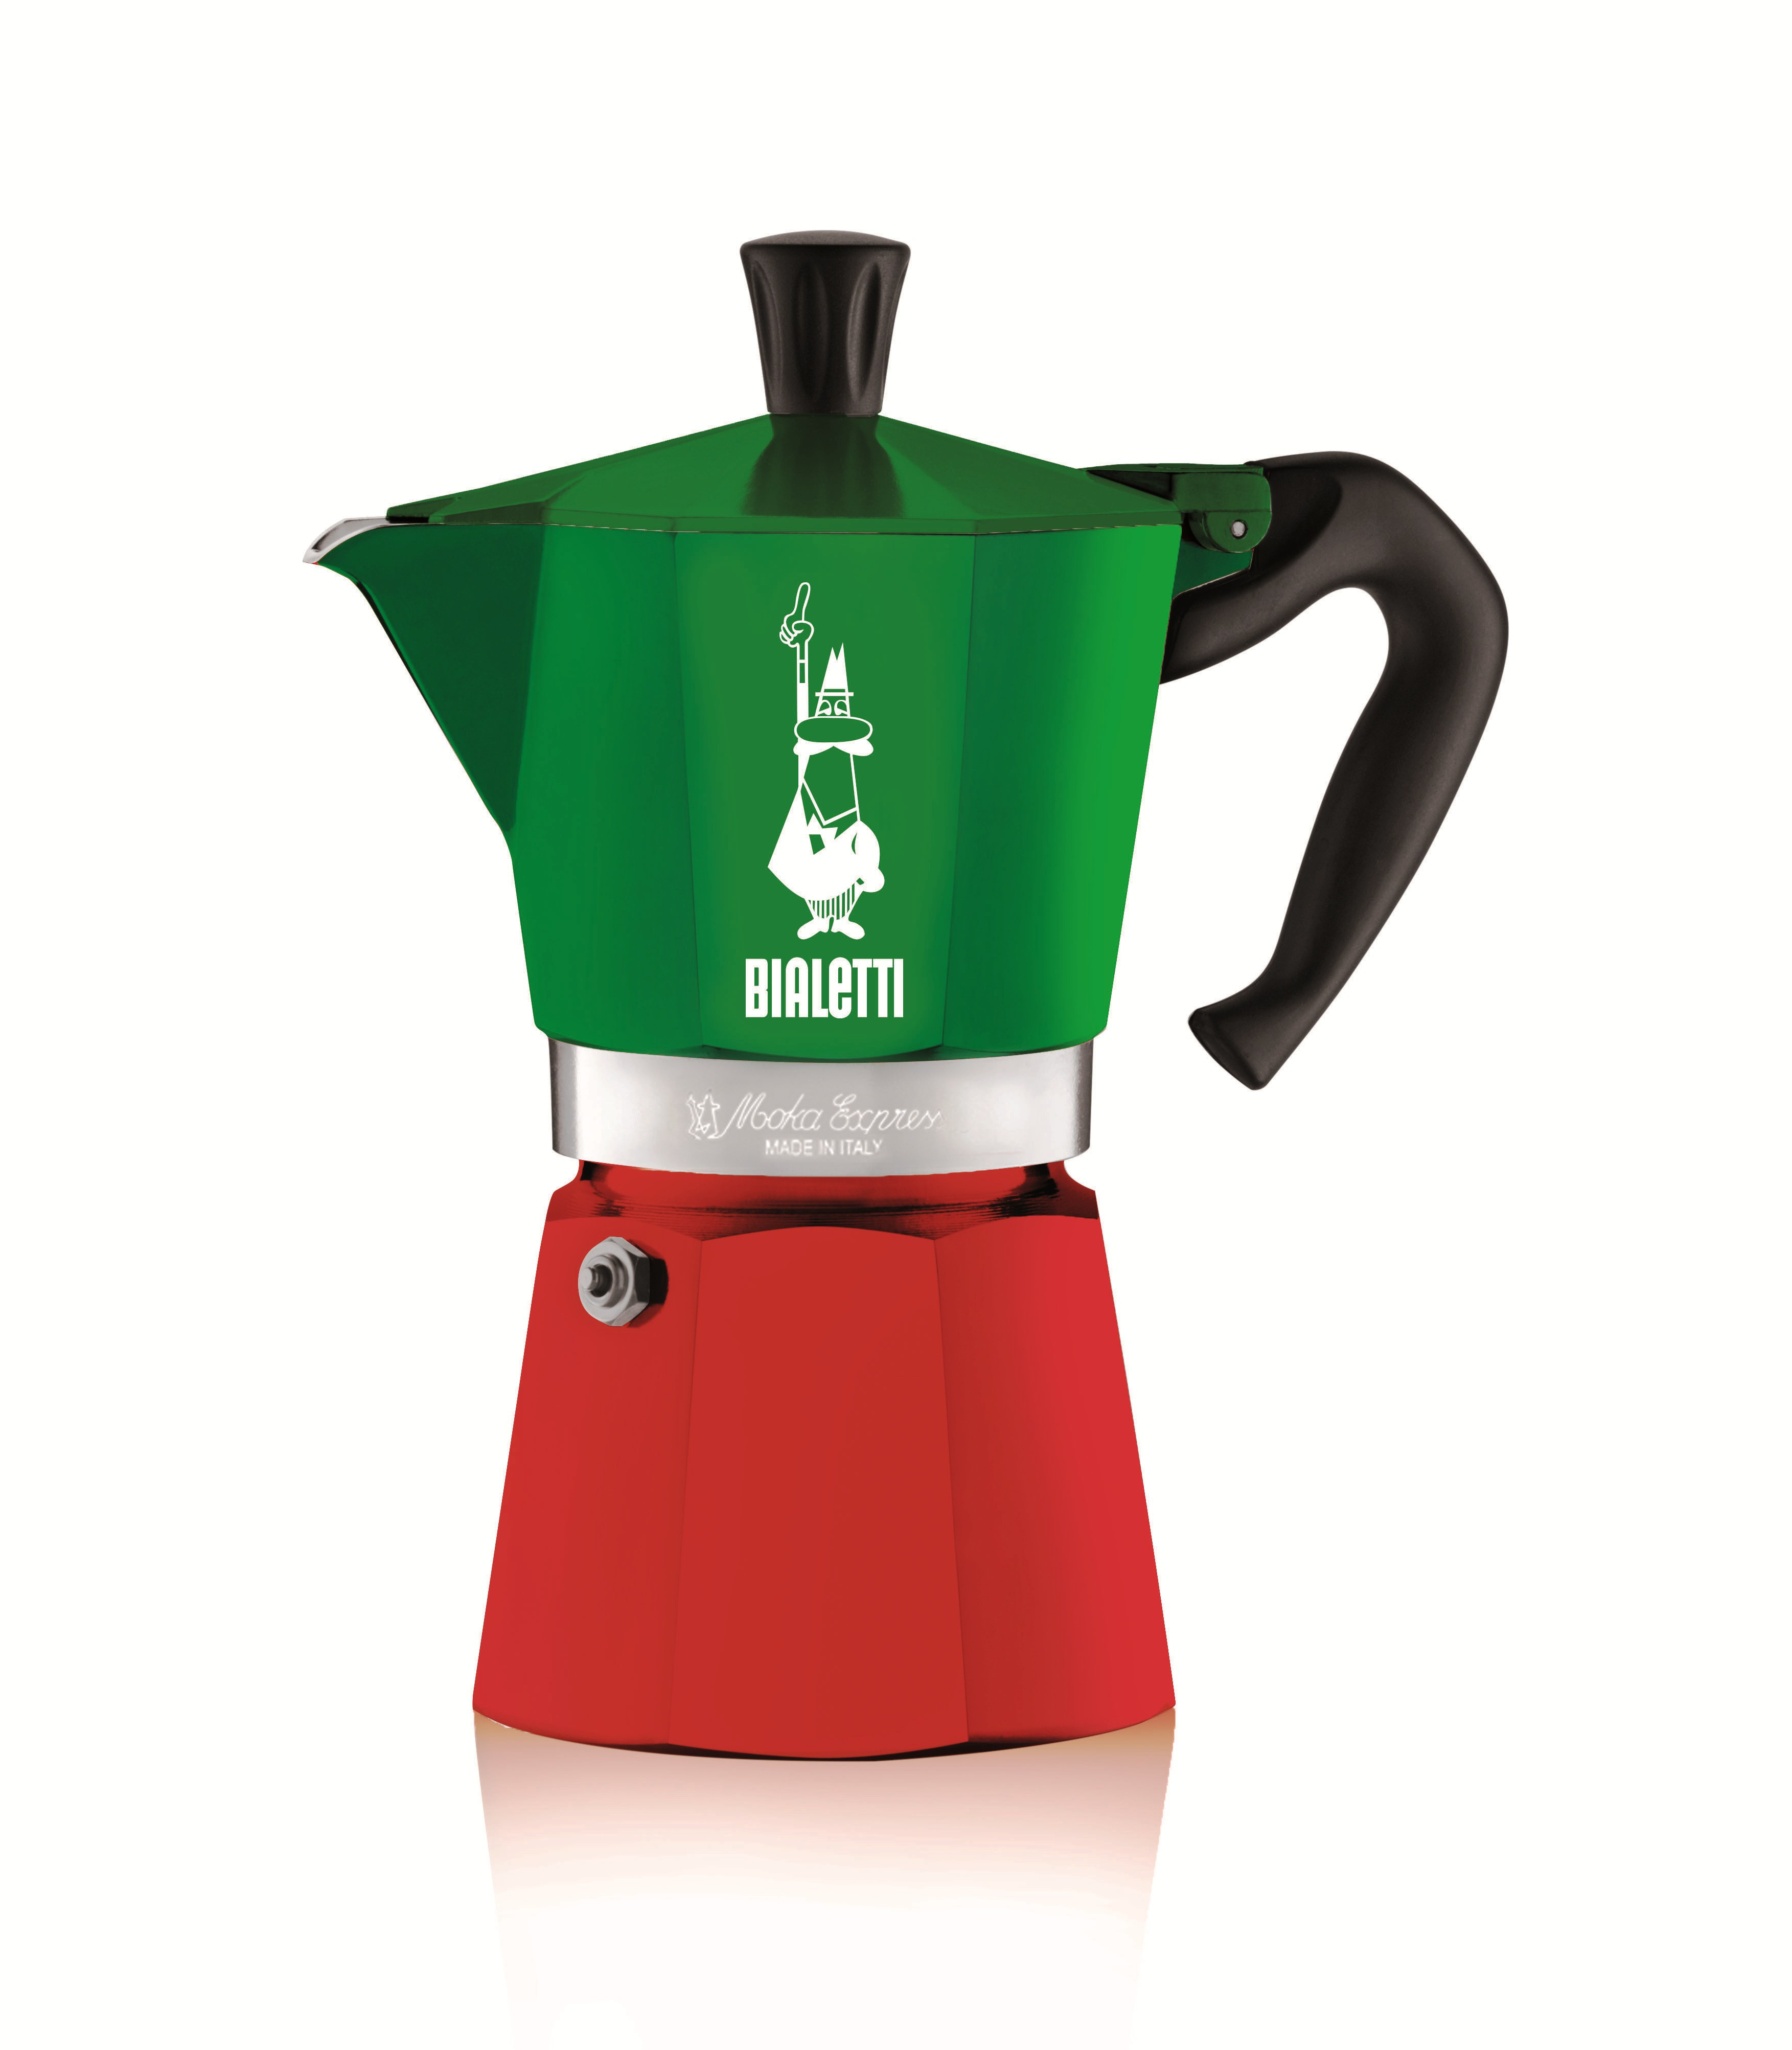 Bialetti - Moka Express Tricolore 6 tazze, Multicolor, large image number 0